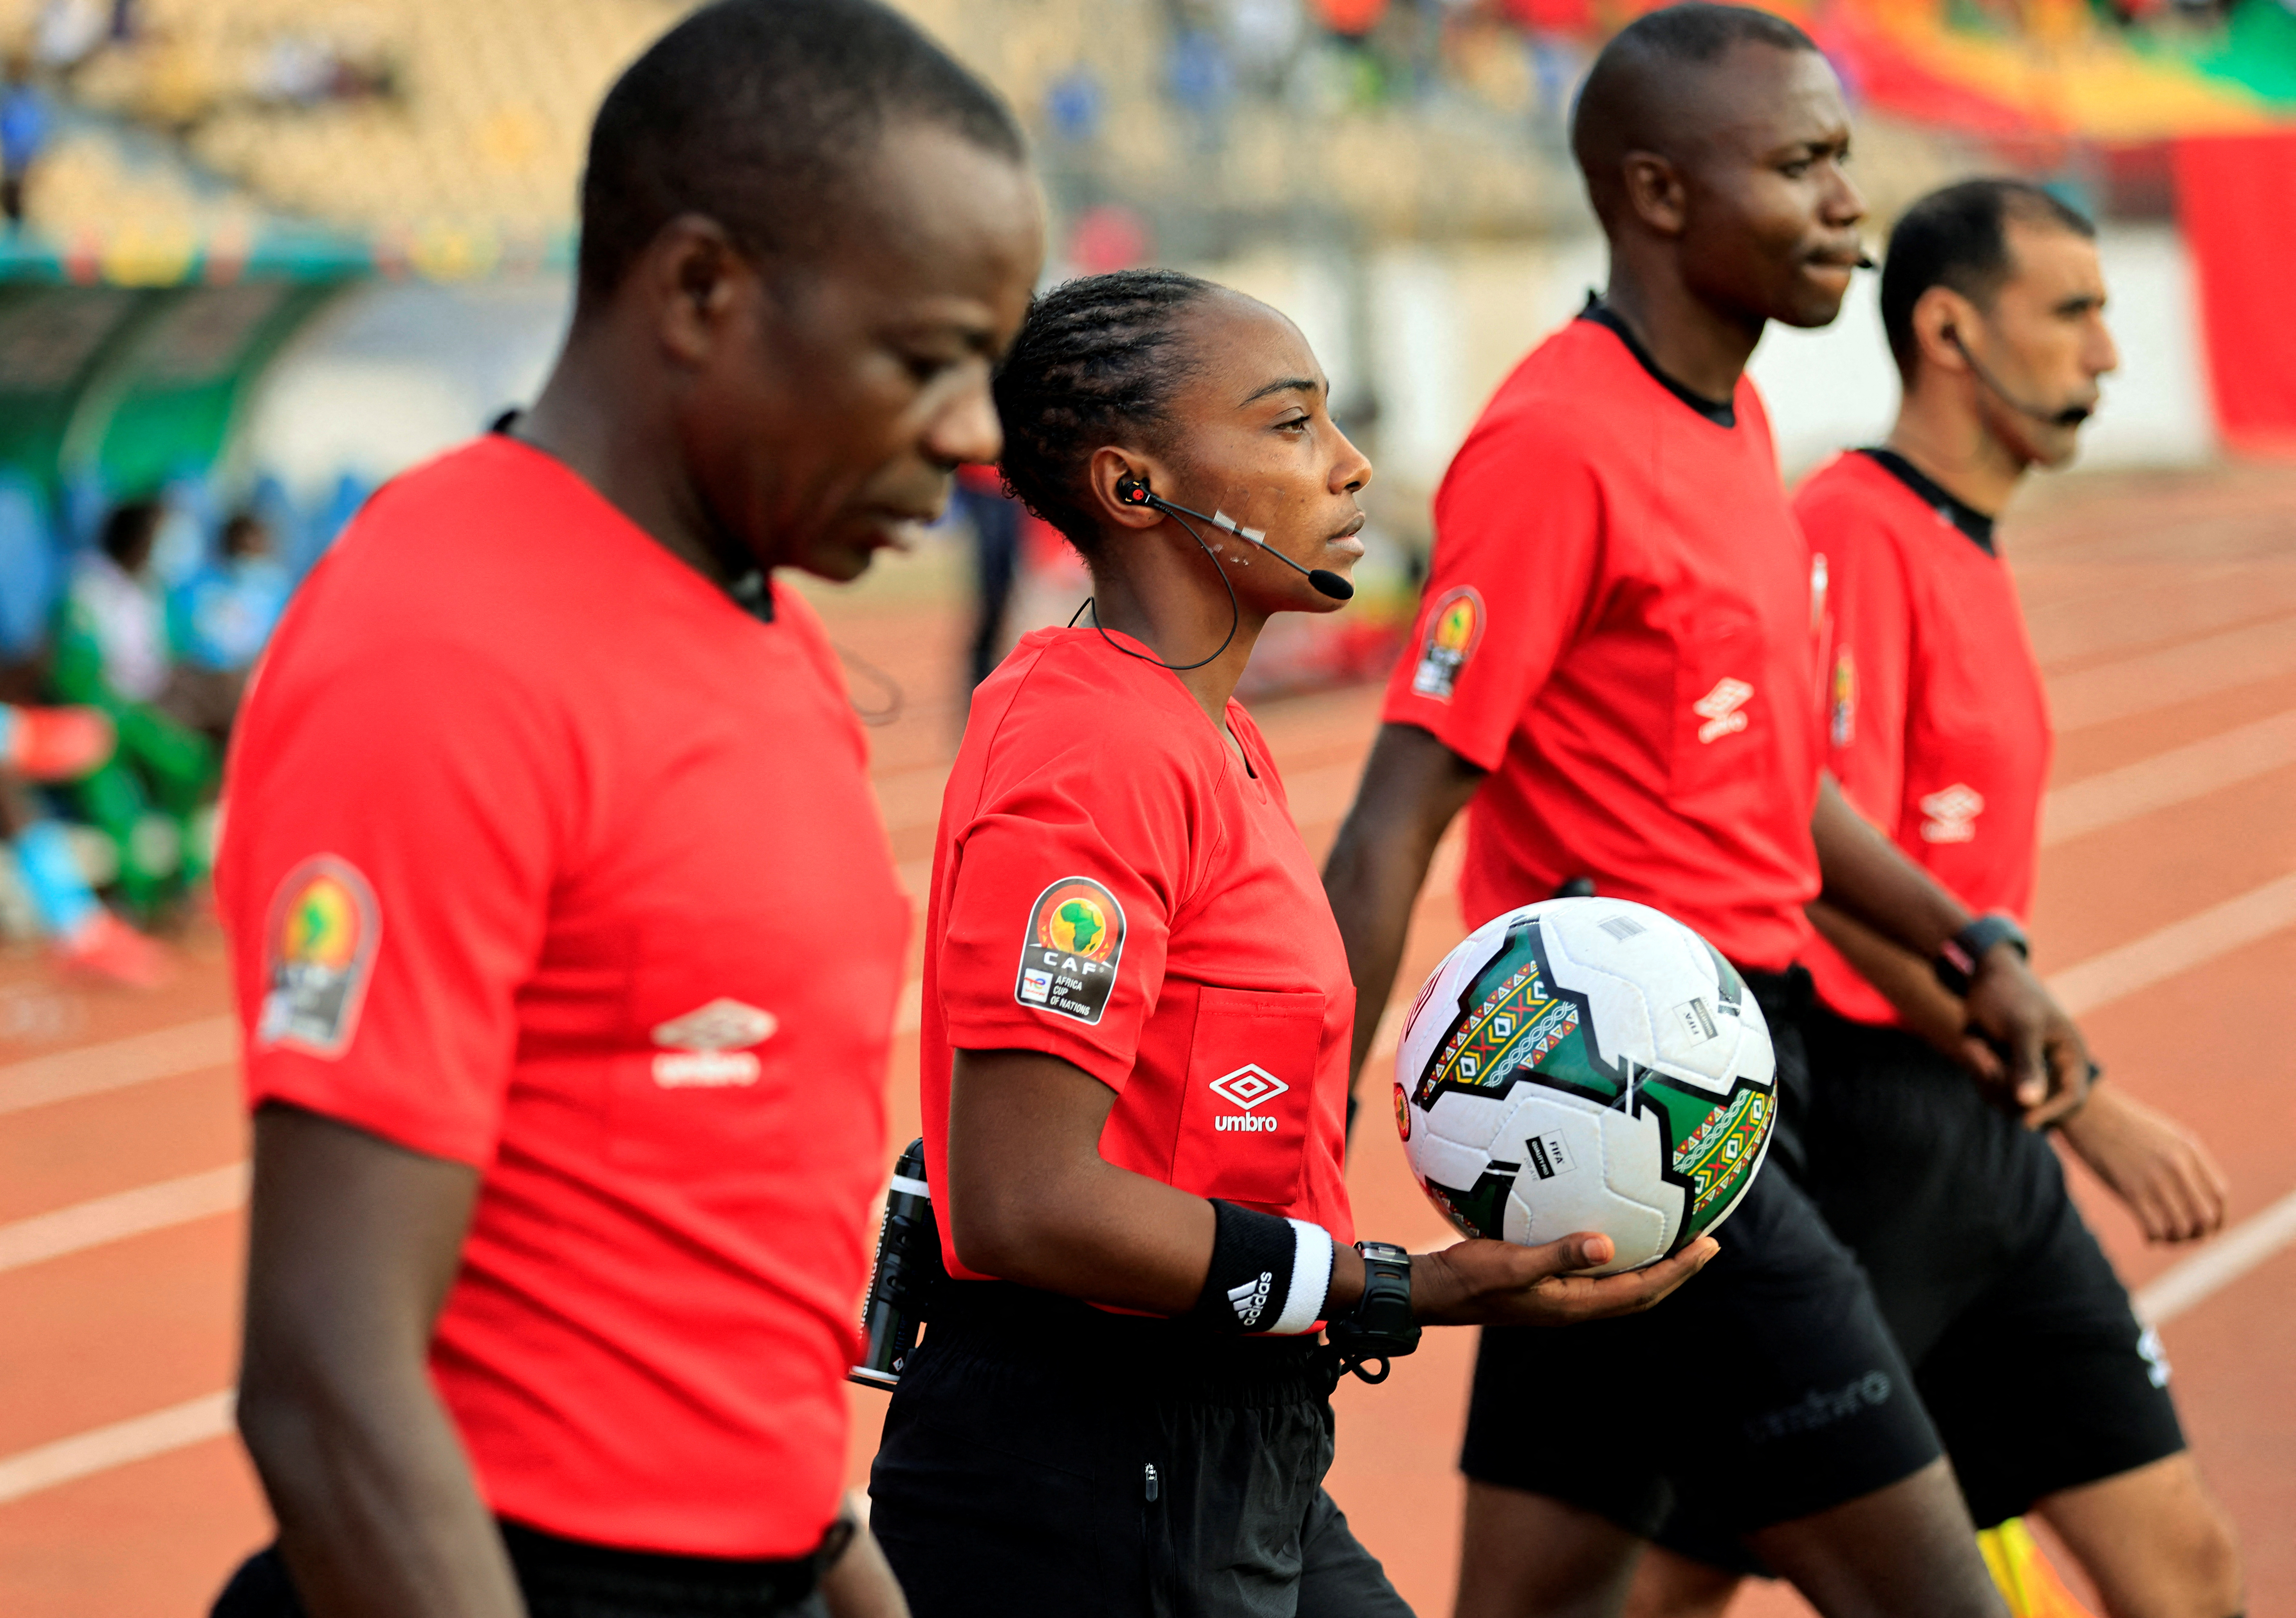 Soccer Football - Africa Cup of Nations - Group B - Zimbabwe v Guinea - Stade Ahmadou Ahidjo, Yaounde, Cameroon - January 18, 2022 Referee Salima Mukansanga before the match REUTERS/Thaier Al-Sudani     TPX IMAGES OF THE DAY